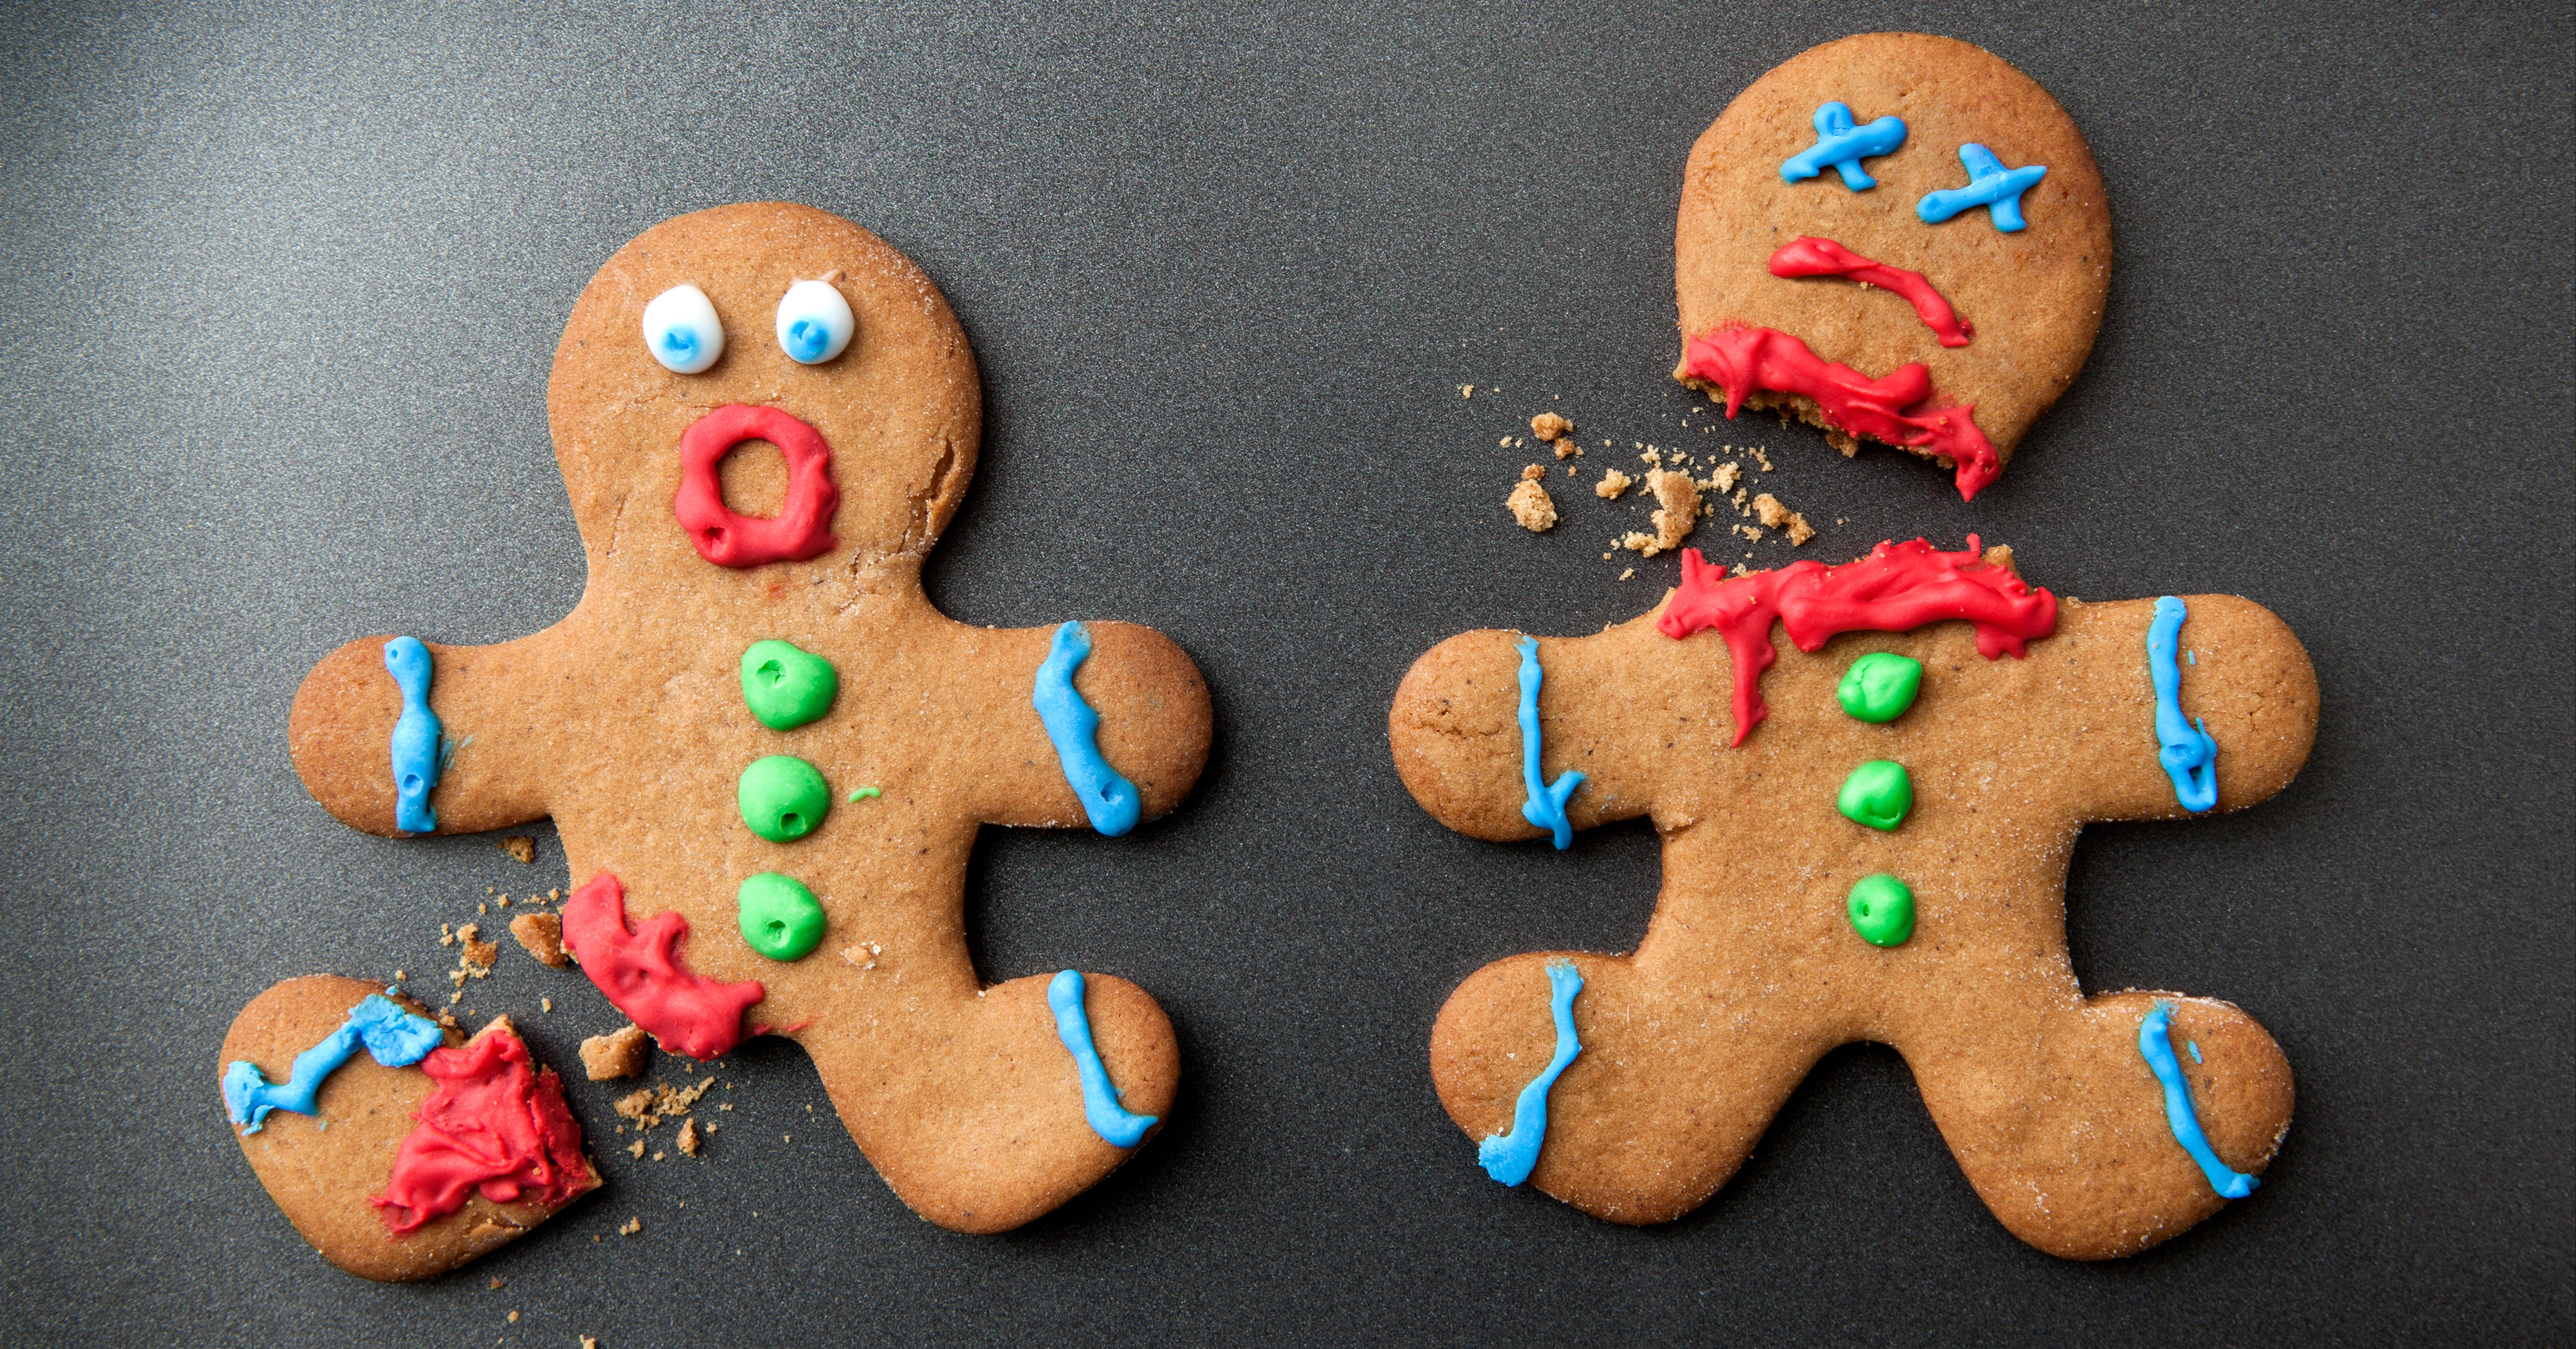 3 Ways to Succeed in a Post-Cookie World